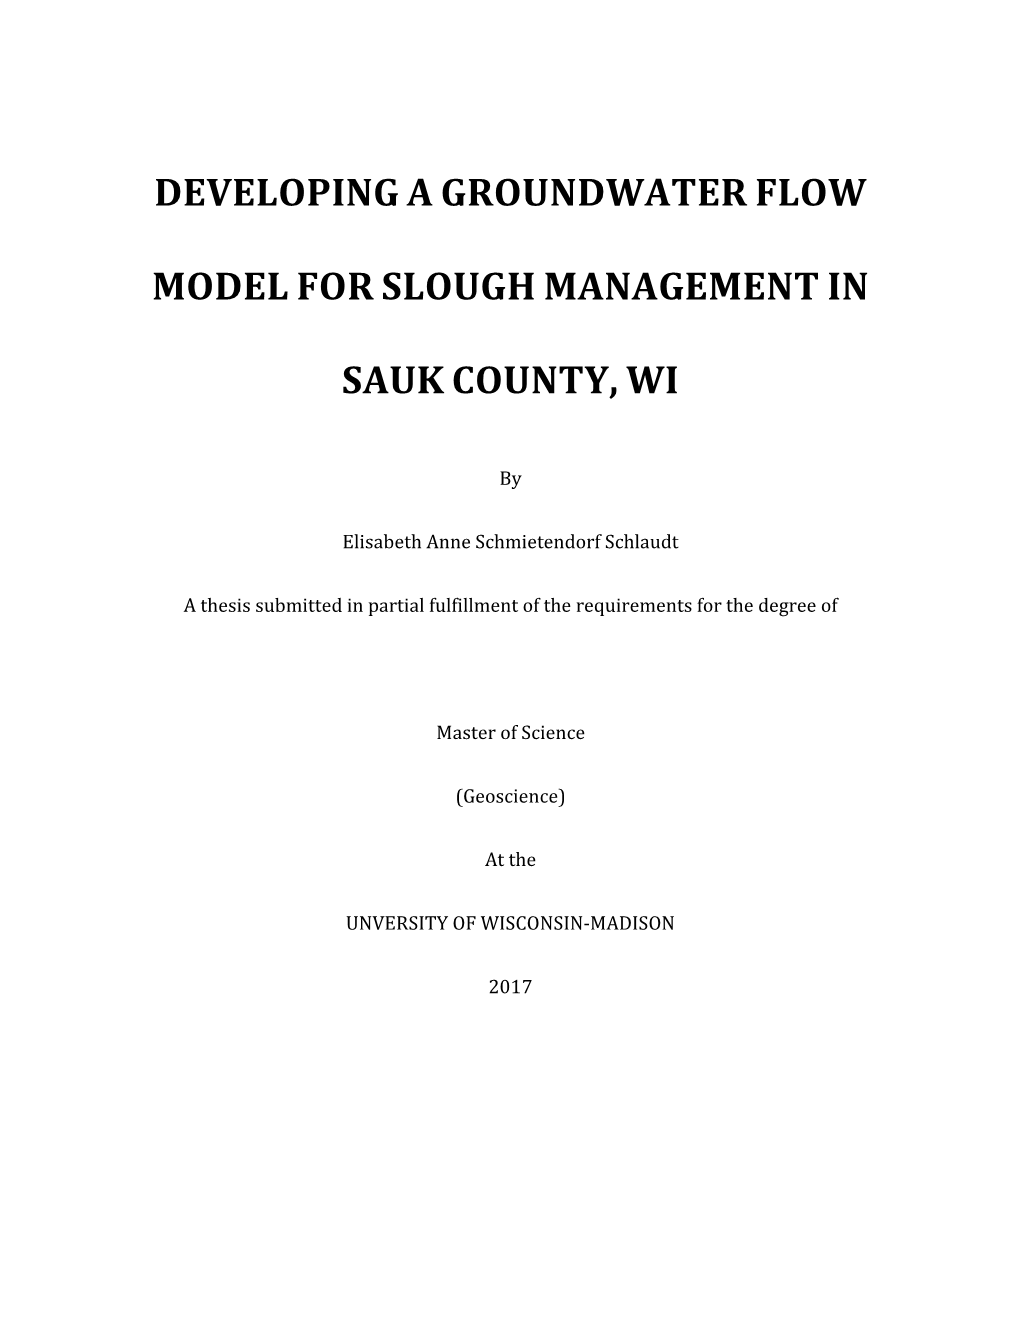 Developing a Groundwater Flow Model for Slough Management in Sauk